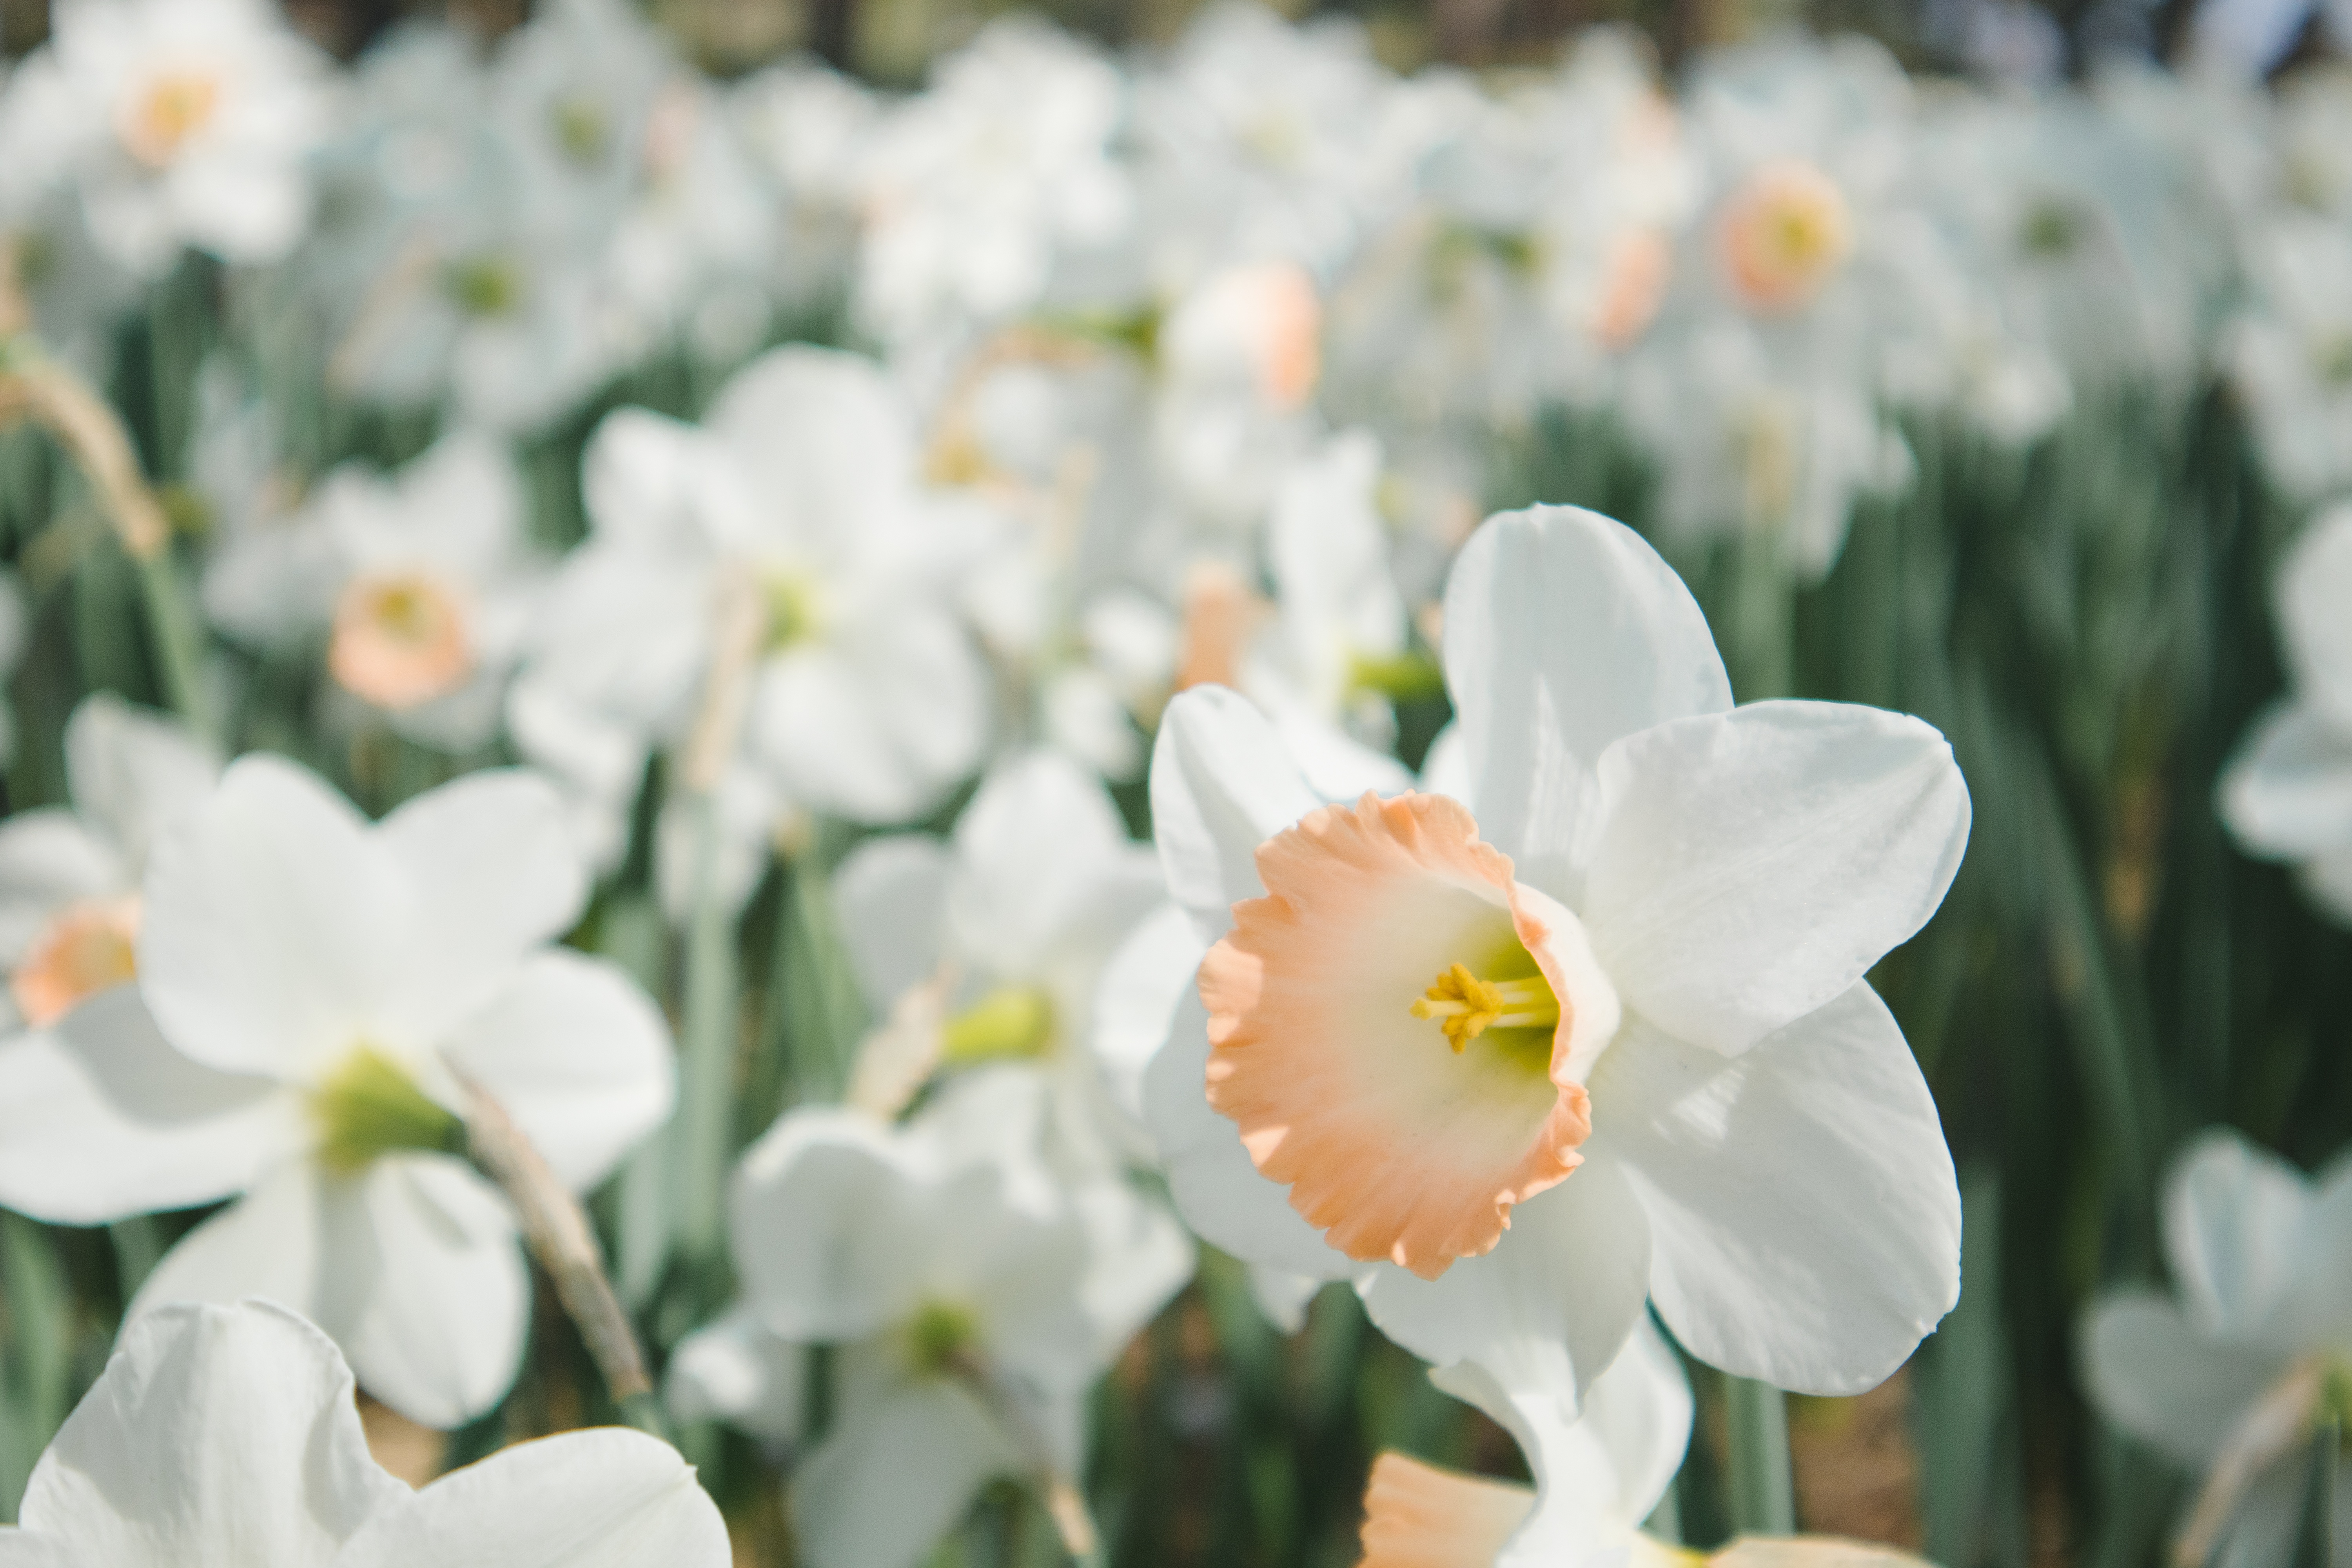 narcissus, earth, daffodil, close up, flower, white flower, flowers